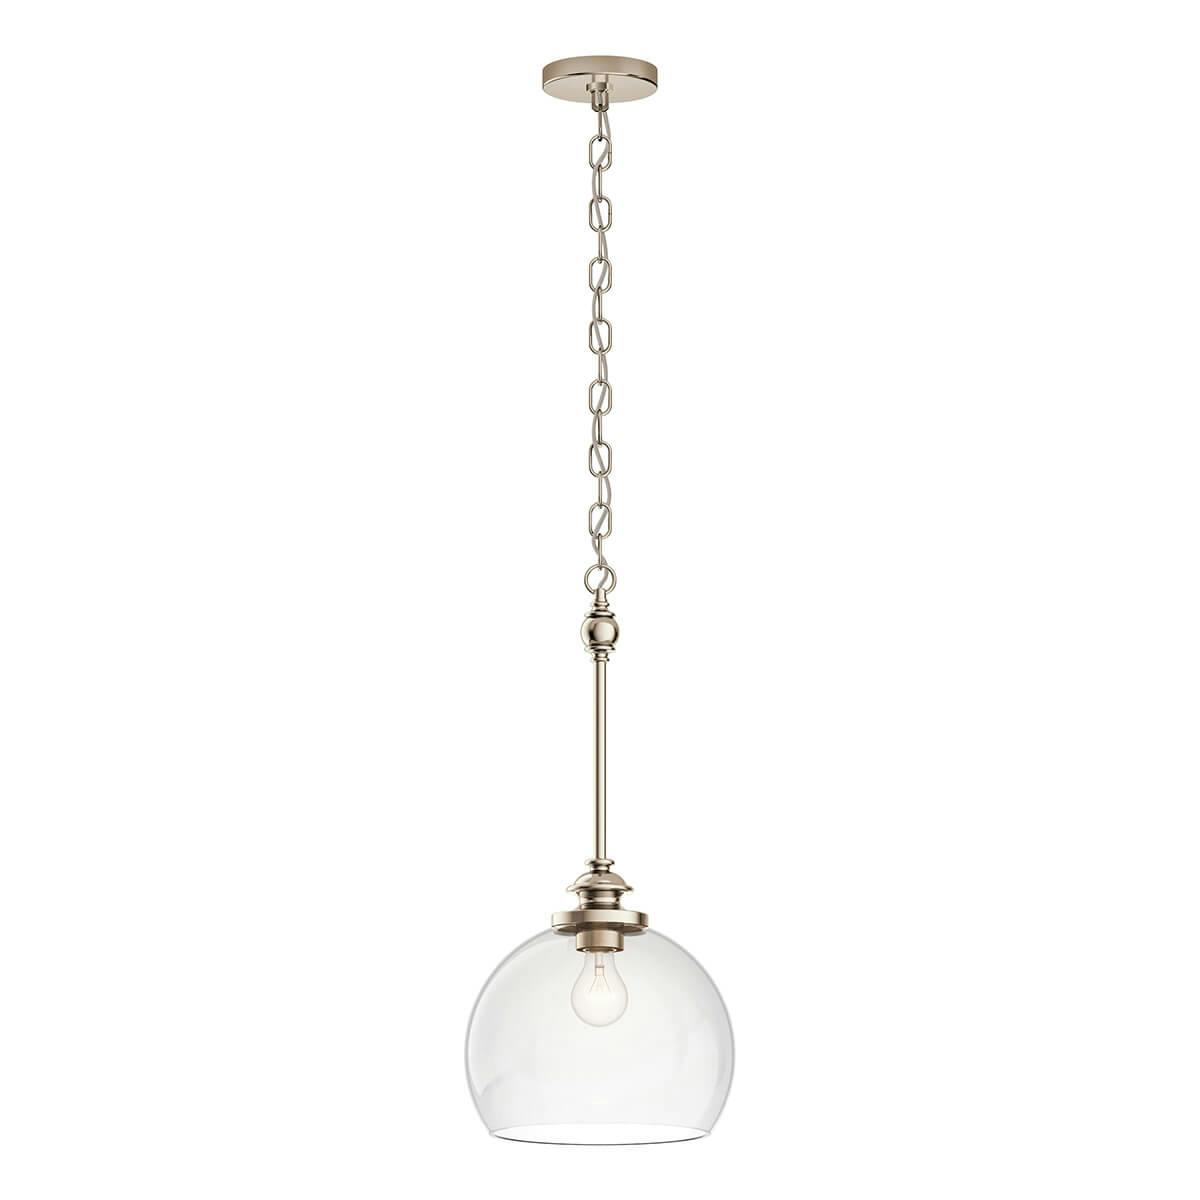 Lecelles 11" 1 Light Pendant Polished Nickel on a white background